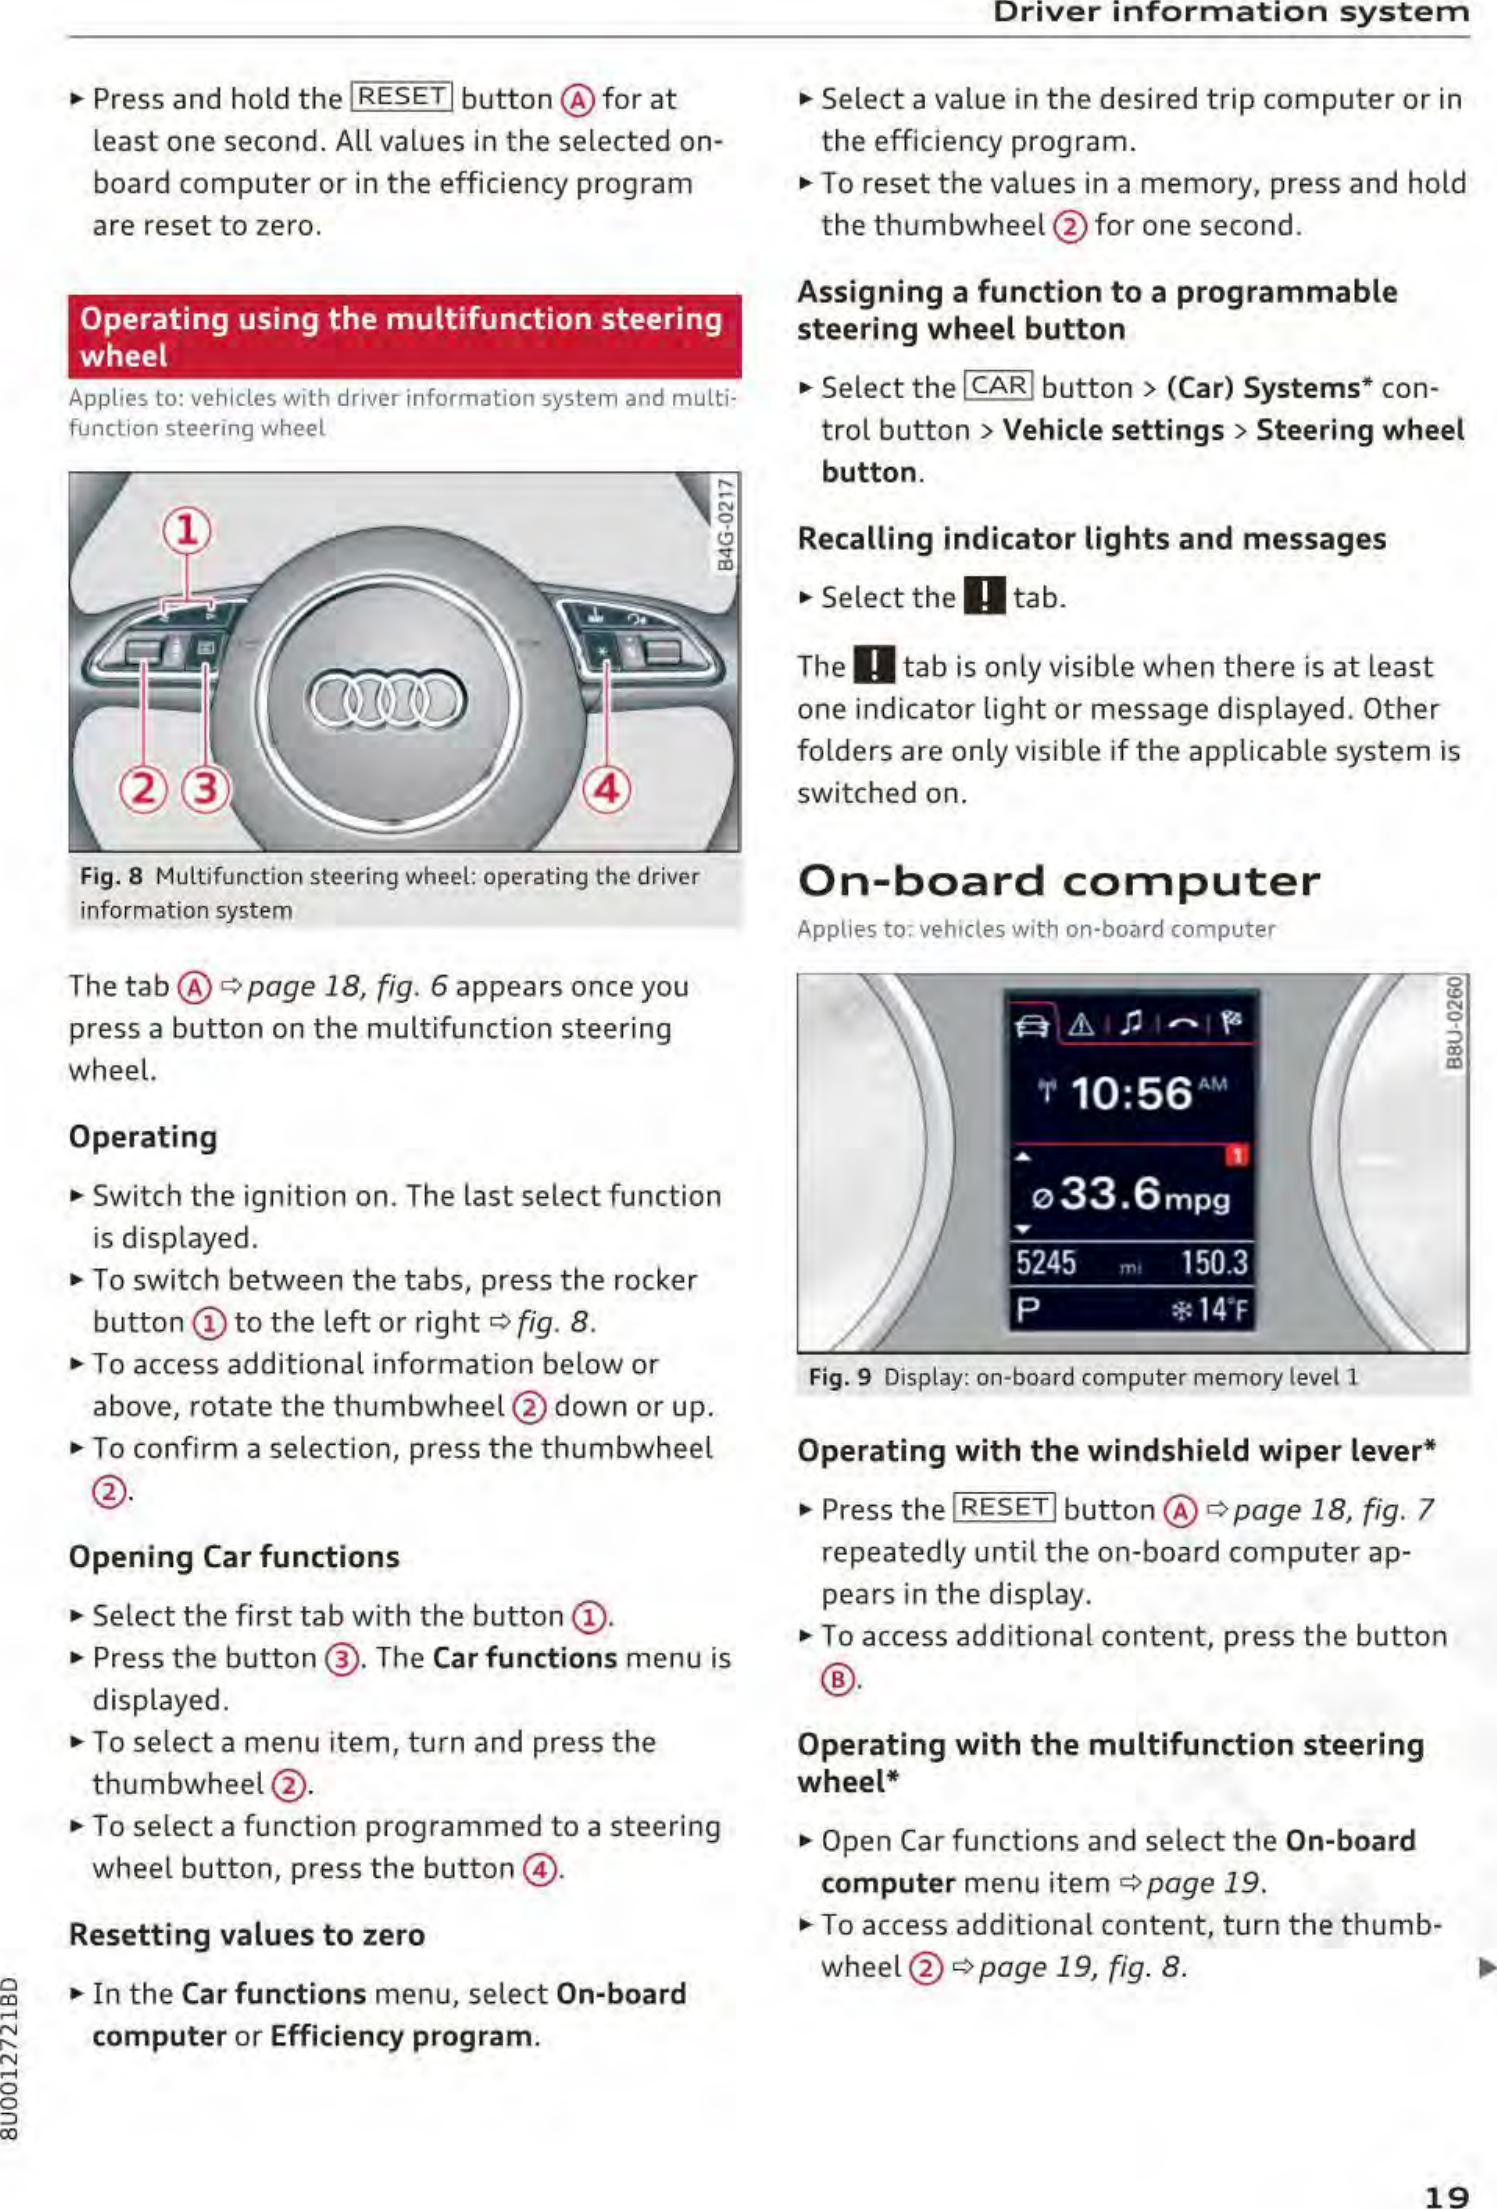 Page 21 of Robert Bosch Car Multimedia AUFPK20 Instrument cluster with immobilizer User Manual part 1